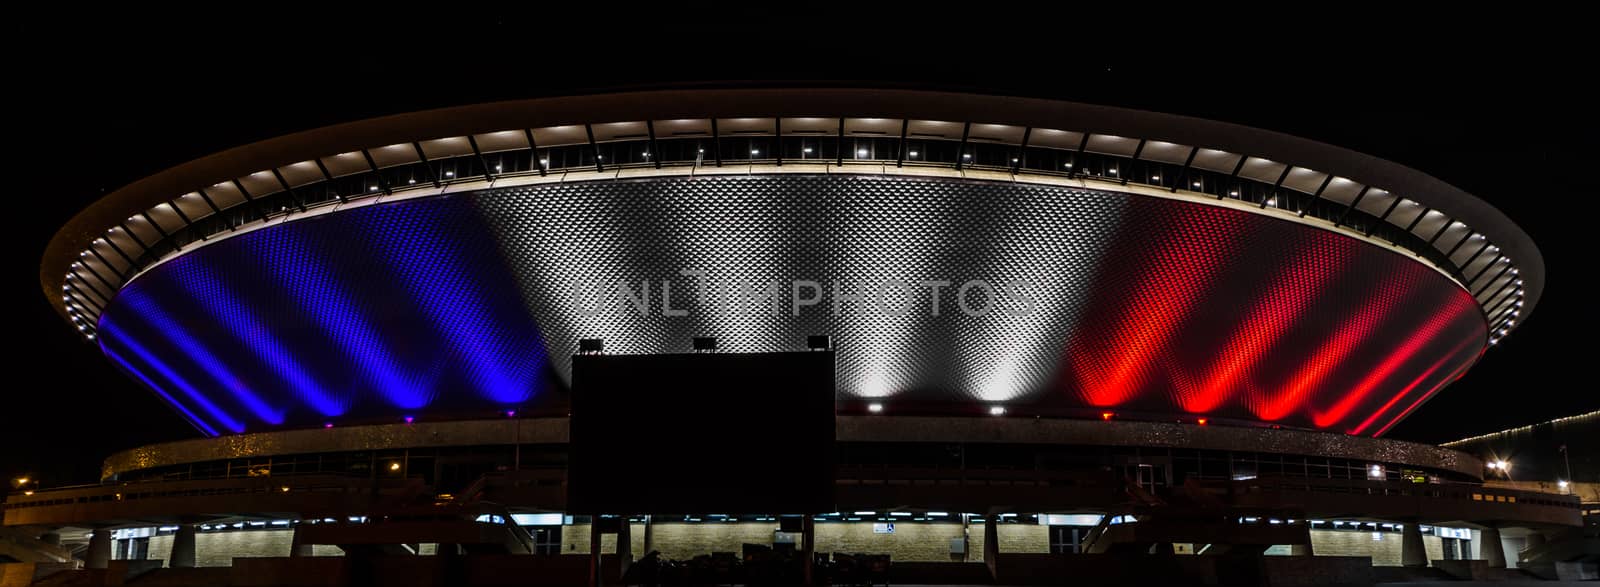 KATOWICE, POLAND - NOVEMBER 14: "Je suis Parisien" lights at Voivodeship Sport and Show Arena called Spodek, November 14, 2015 in Katowice, Poland